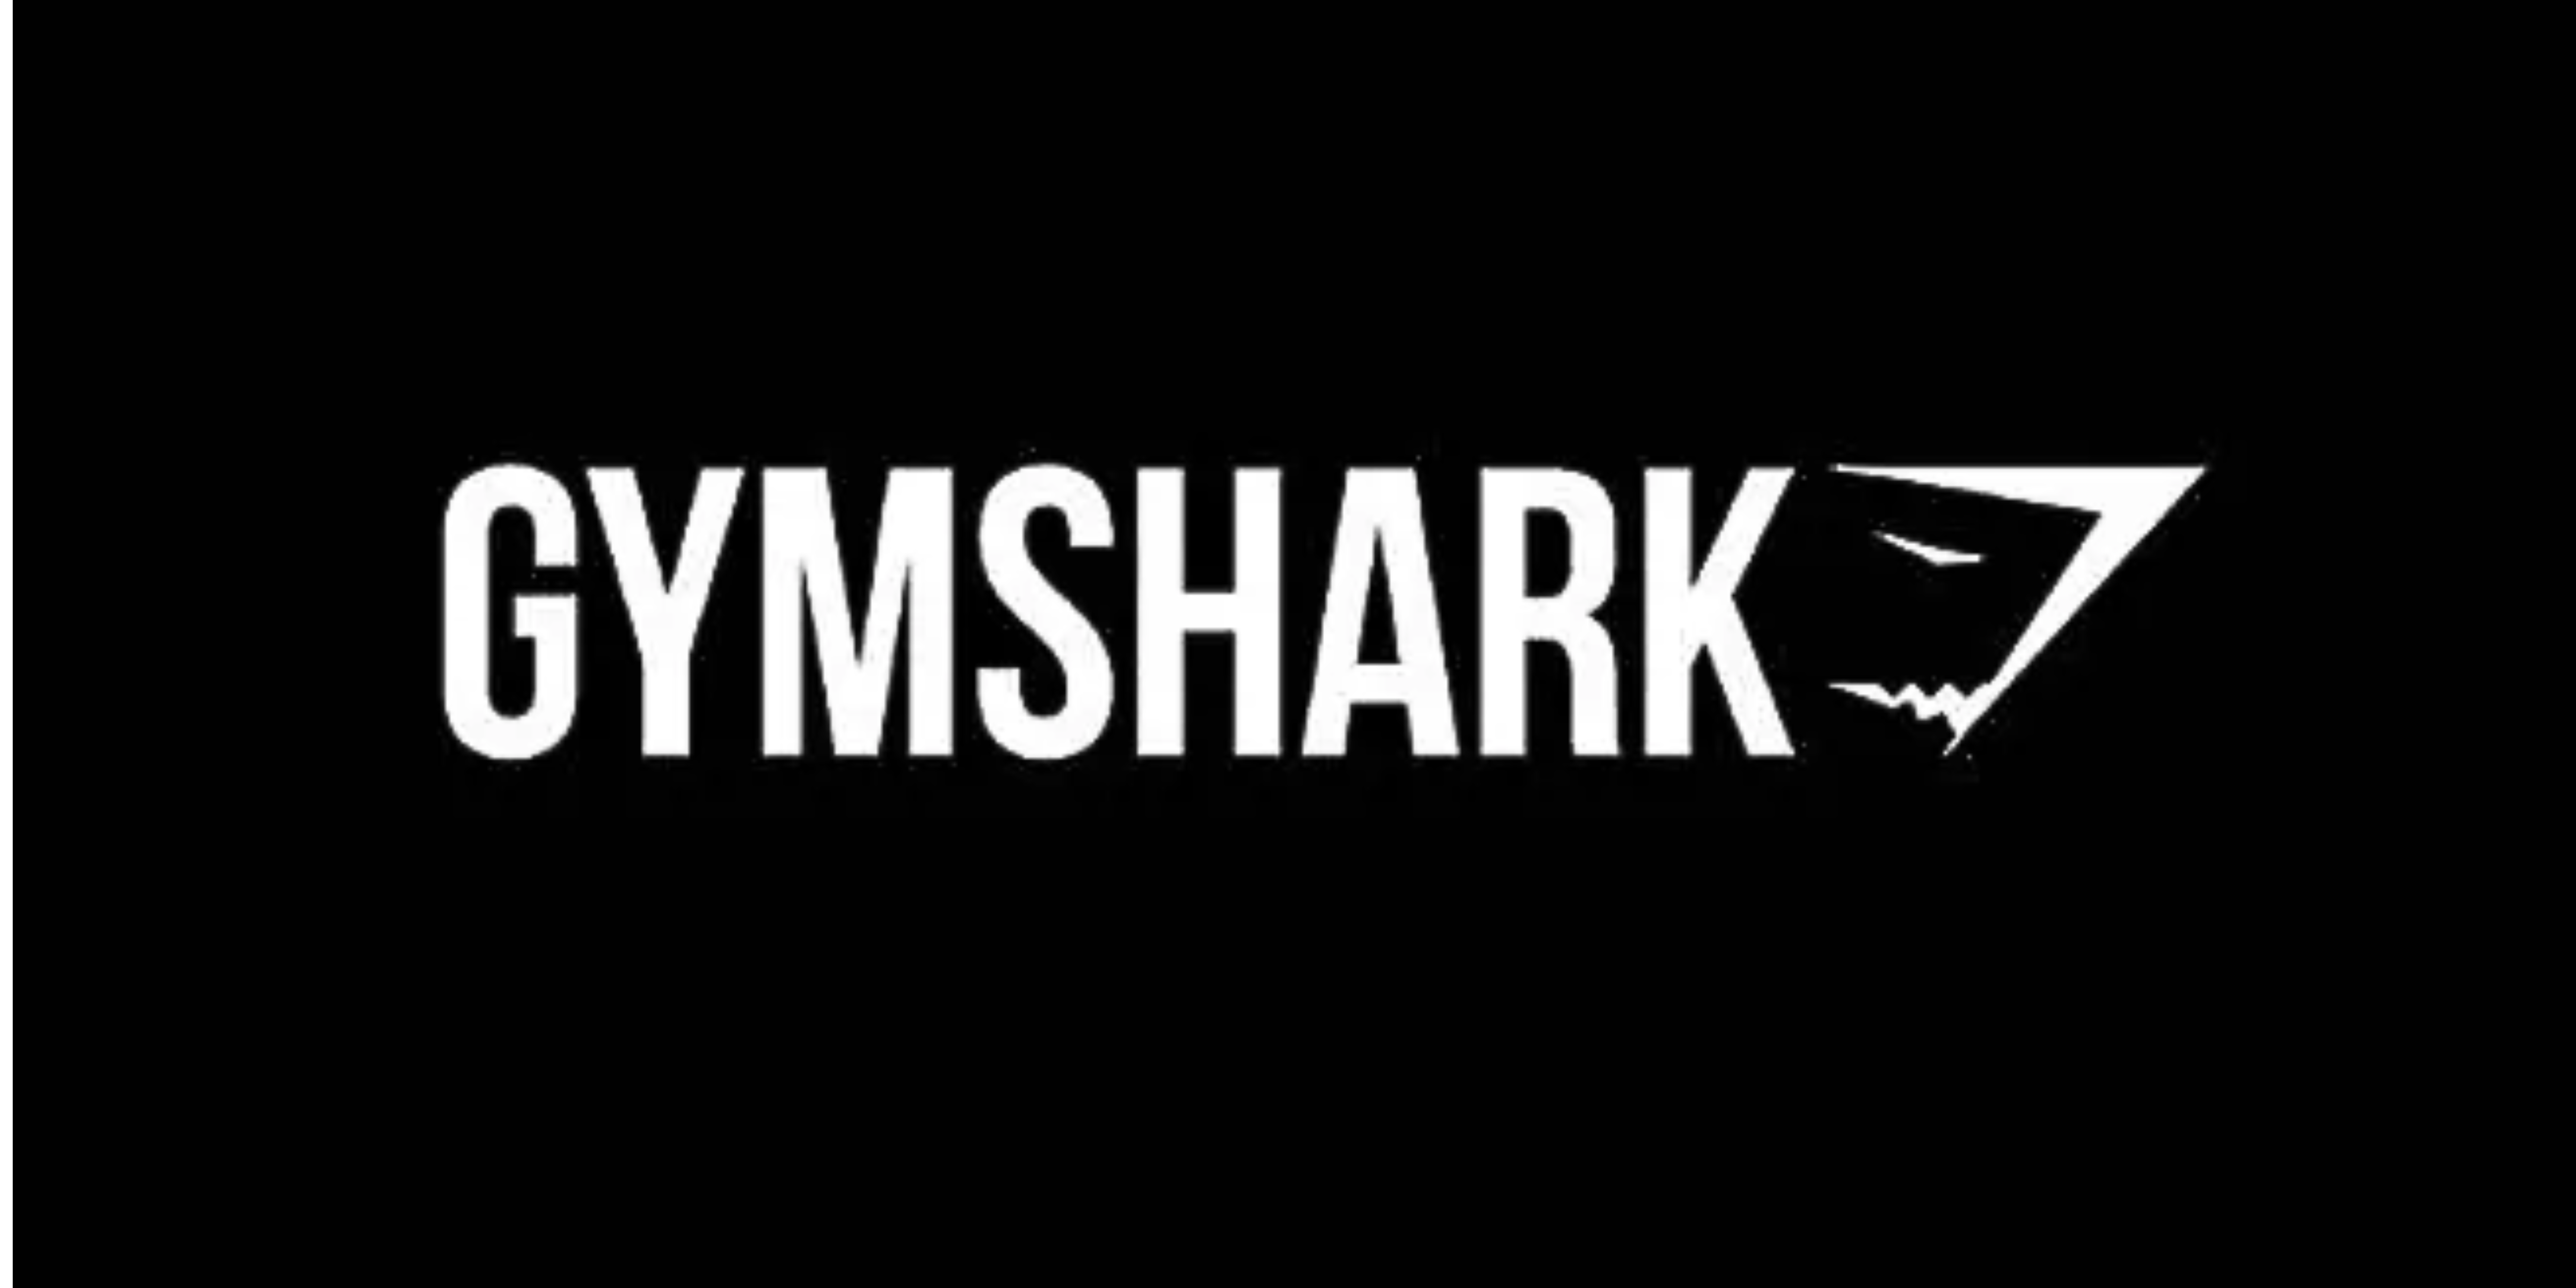 Welcome to the Gymshark family - Gymshark.com